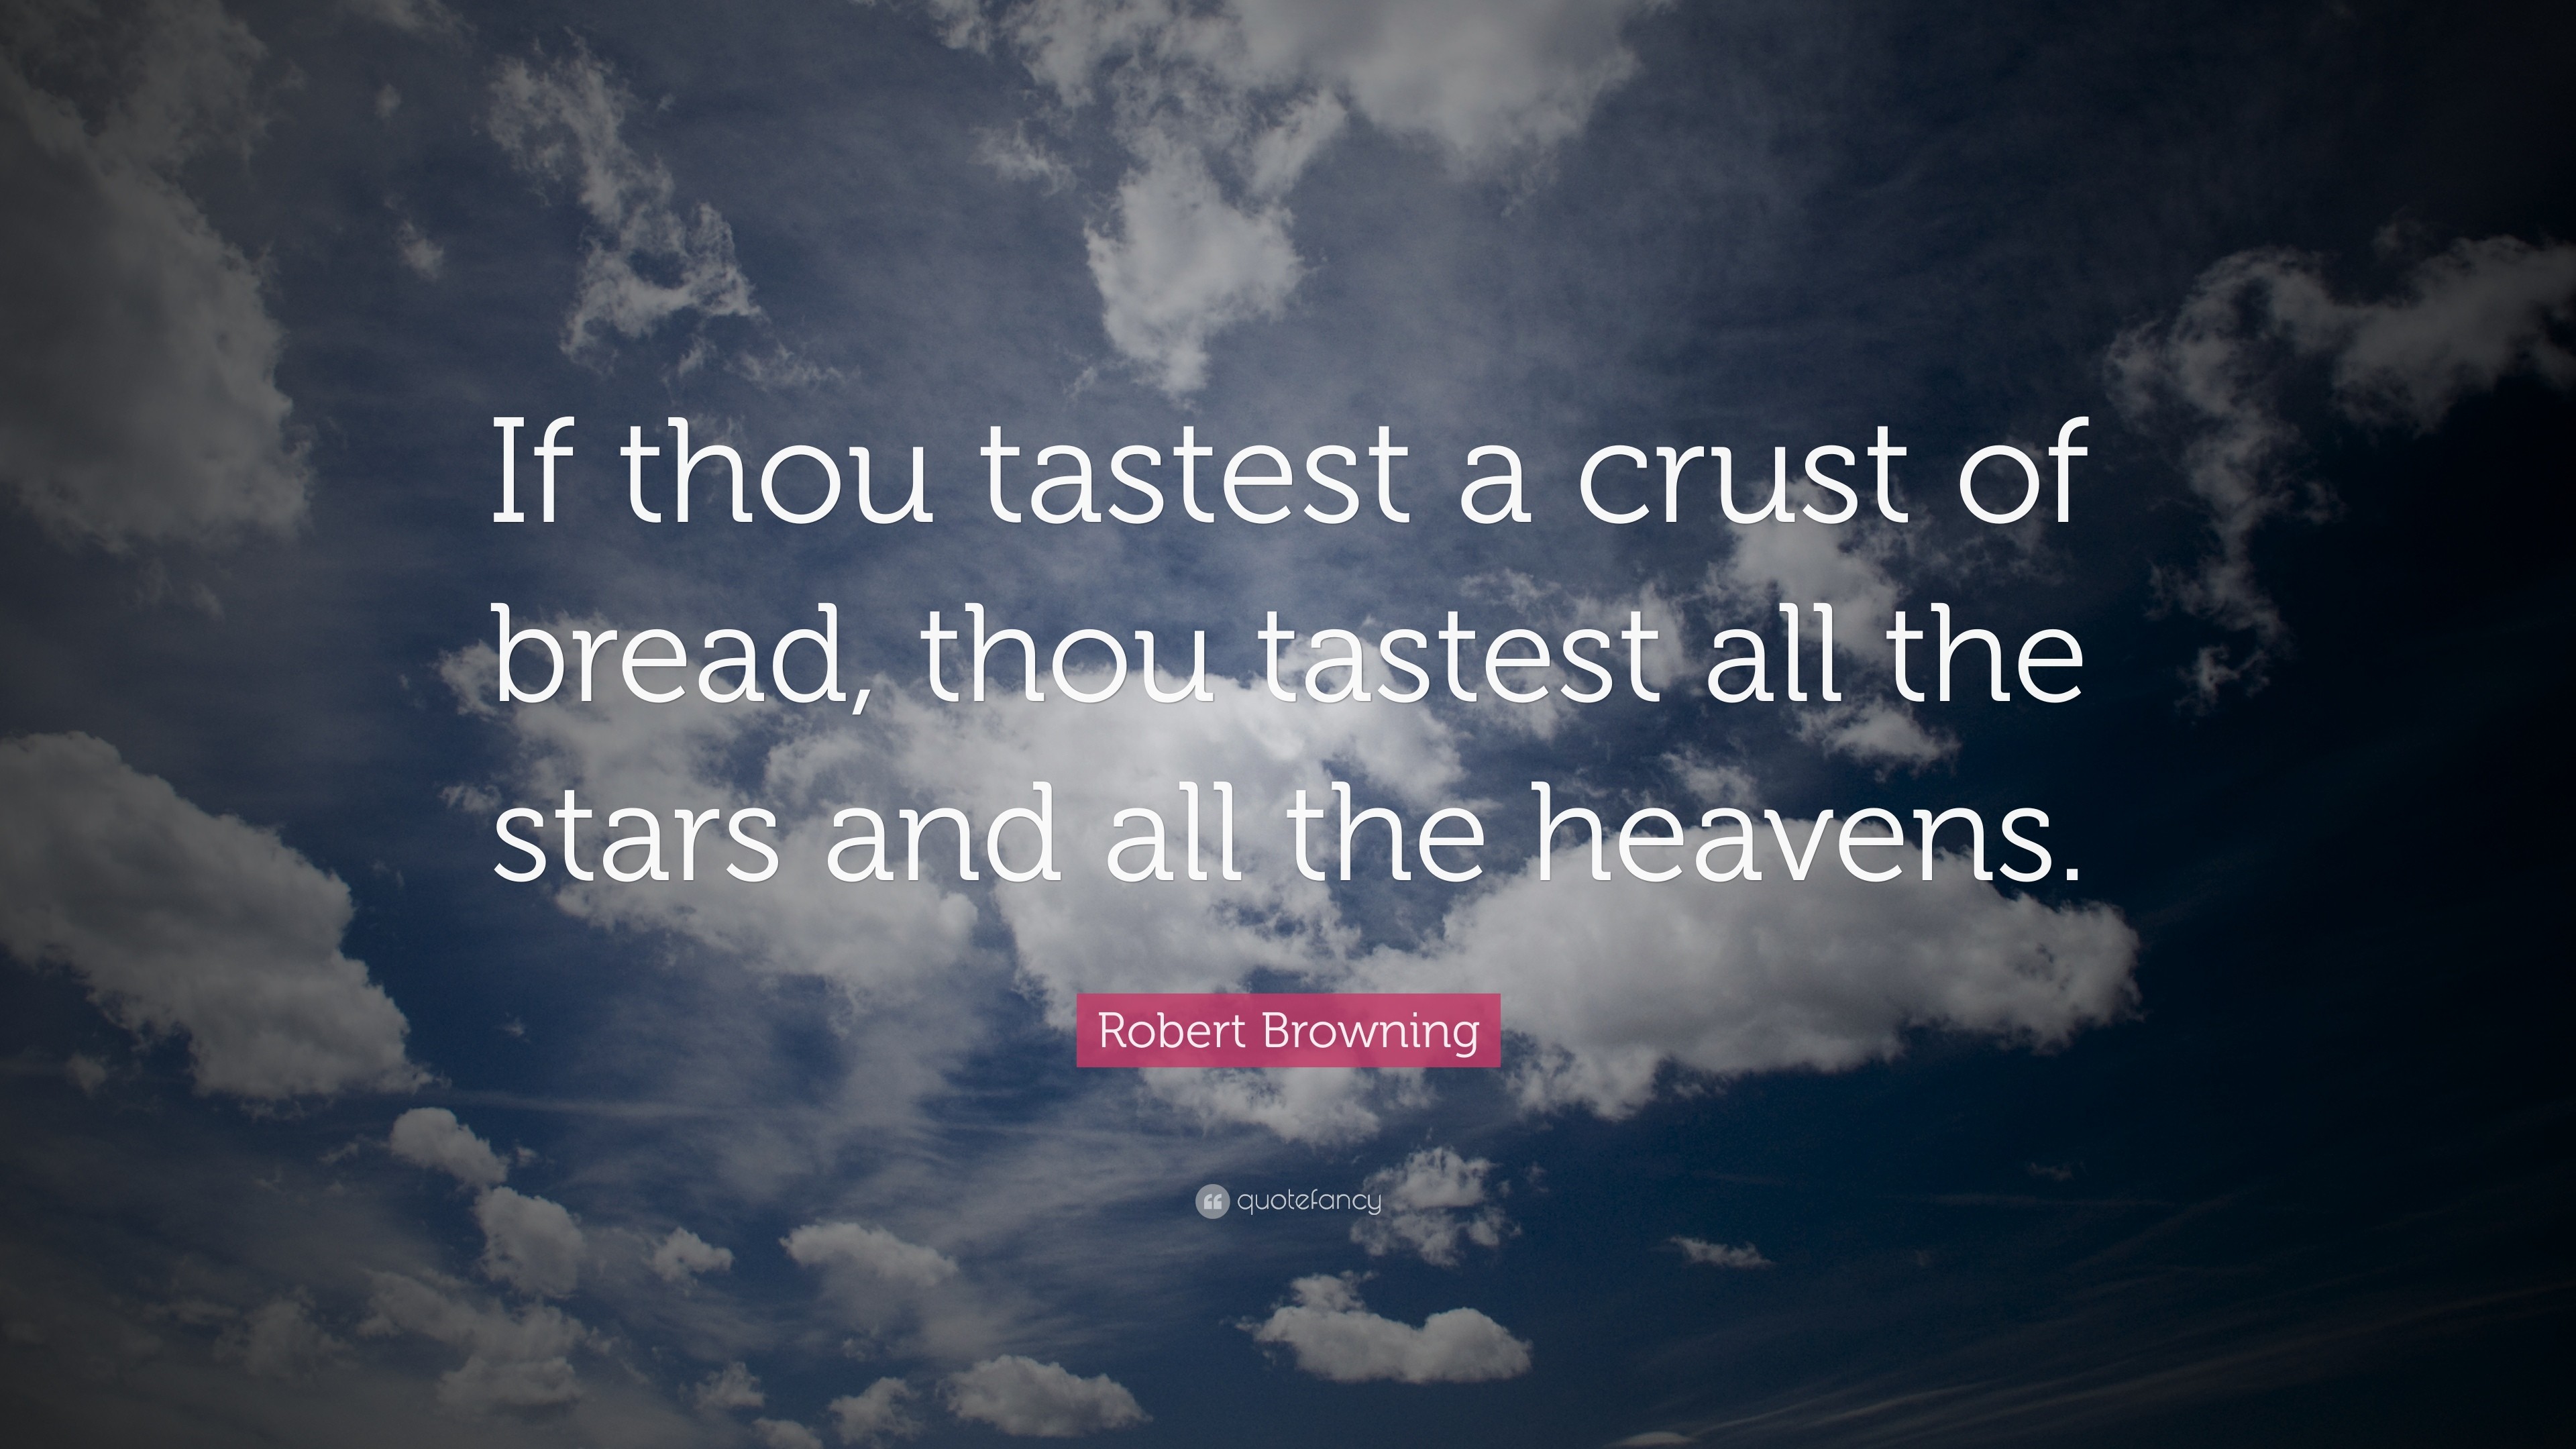 3840x2160 Robert Browning Quote: “If thou tastest a crust of bread, thou tastest all